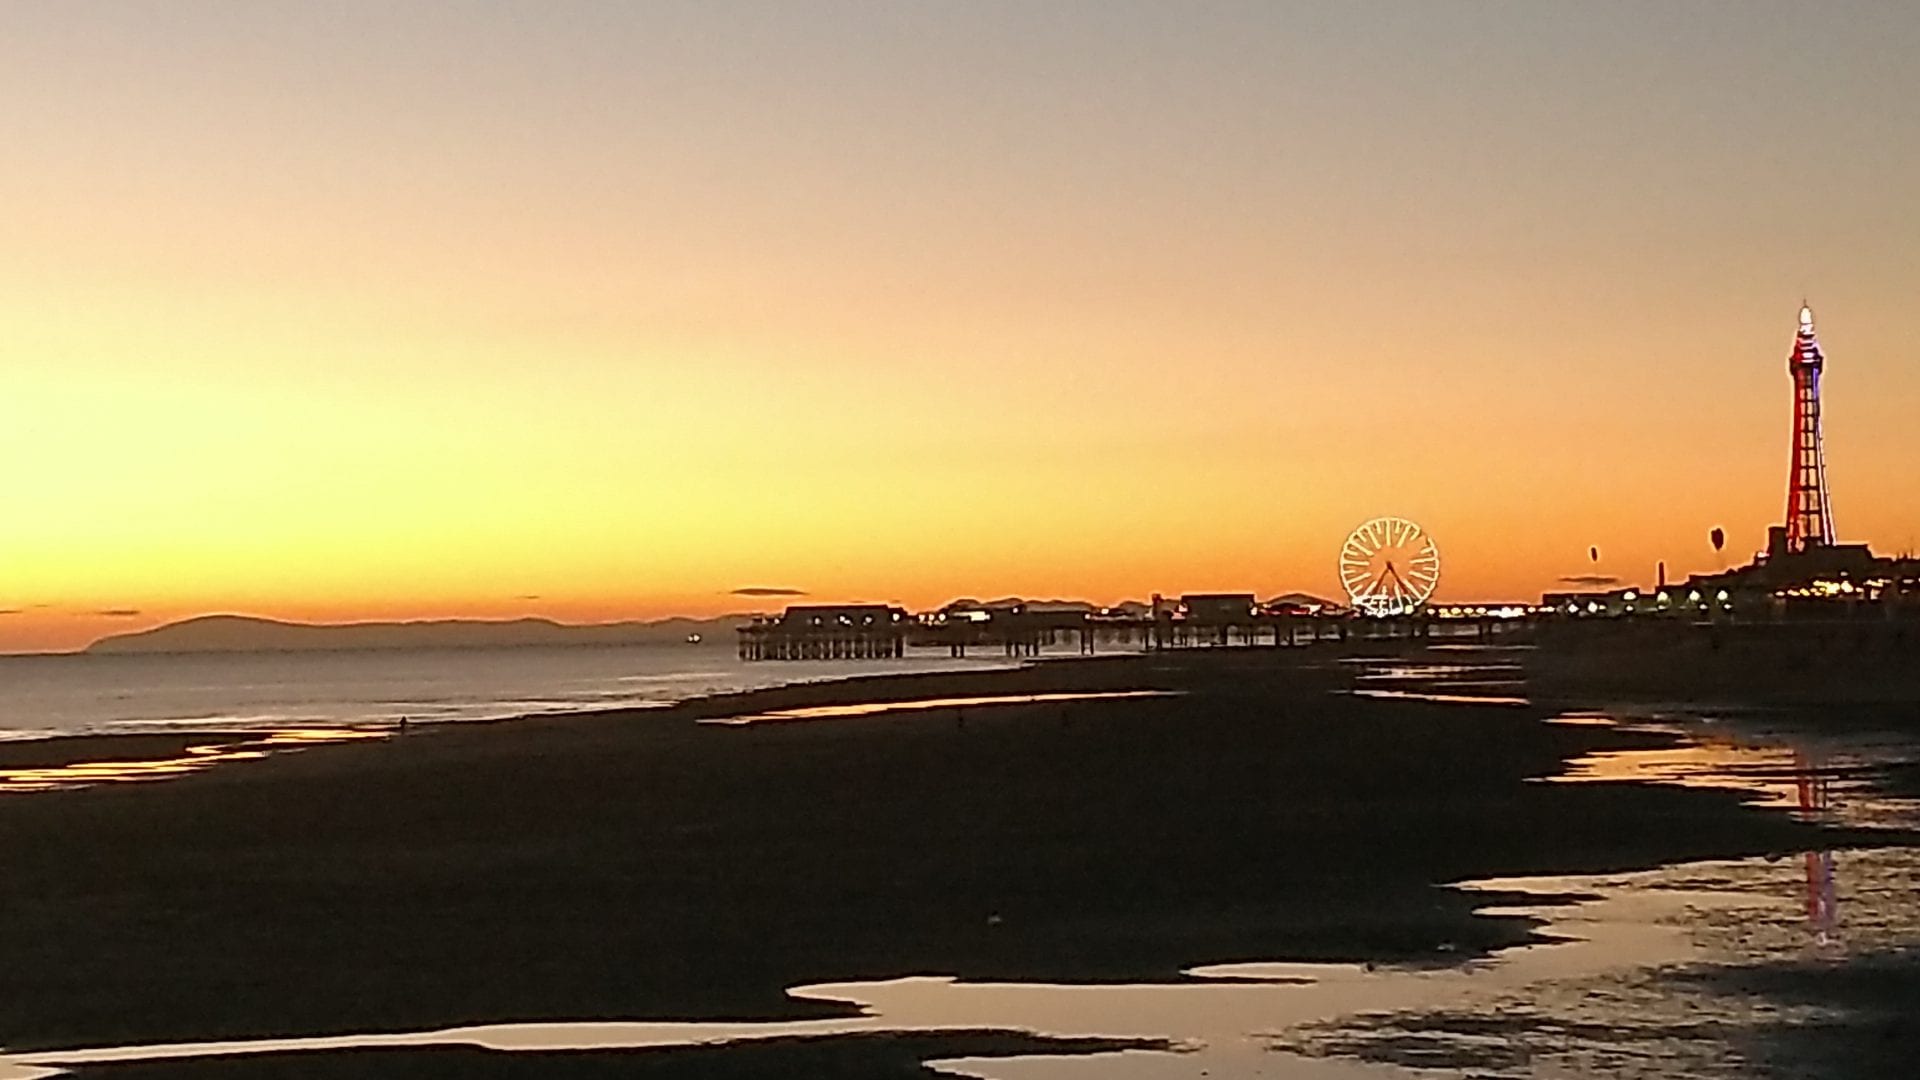 Blackpool View at sunset by Neil Curtis from Wolverhampton